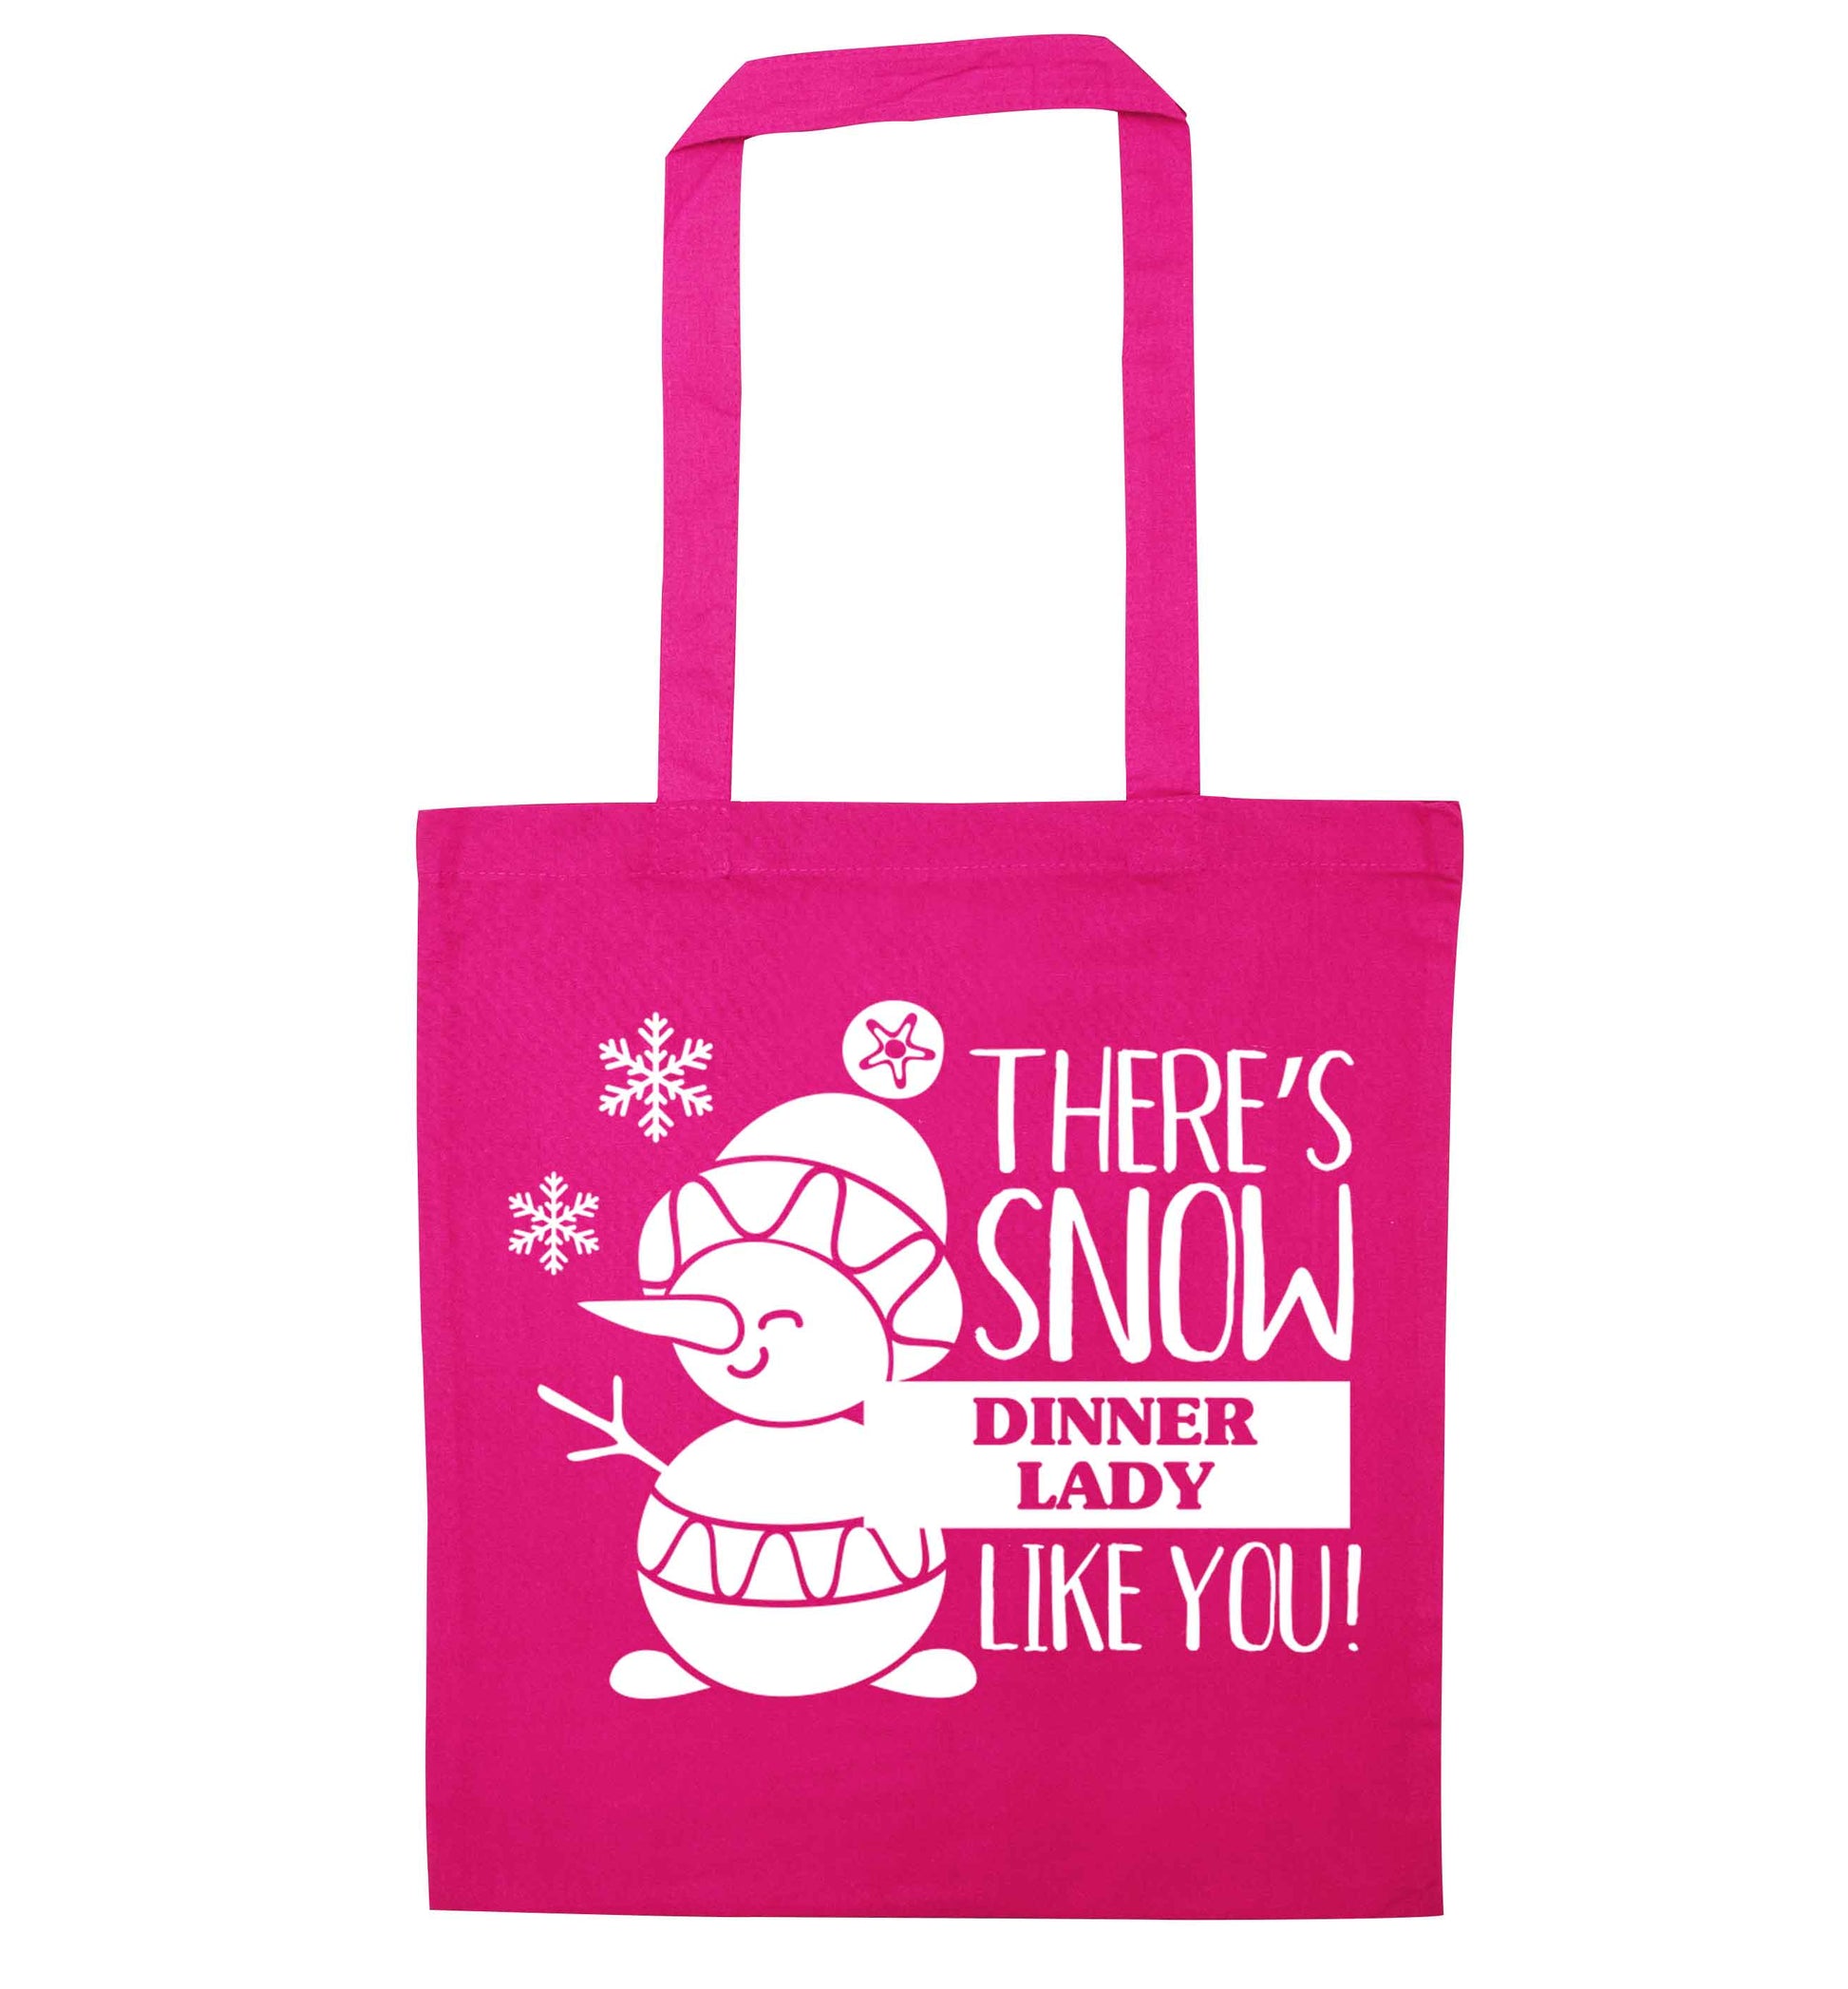 There's snow dinner lady like you pink tote bag